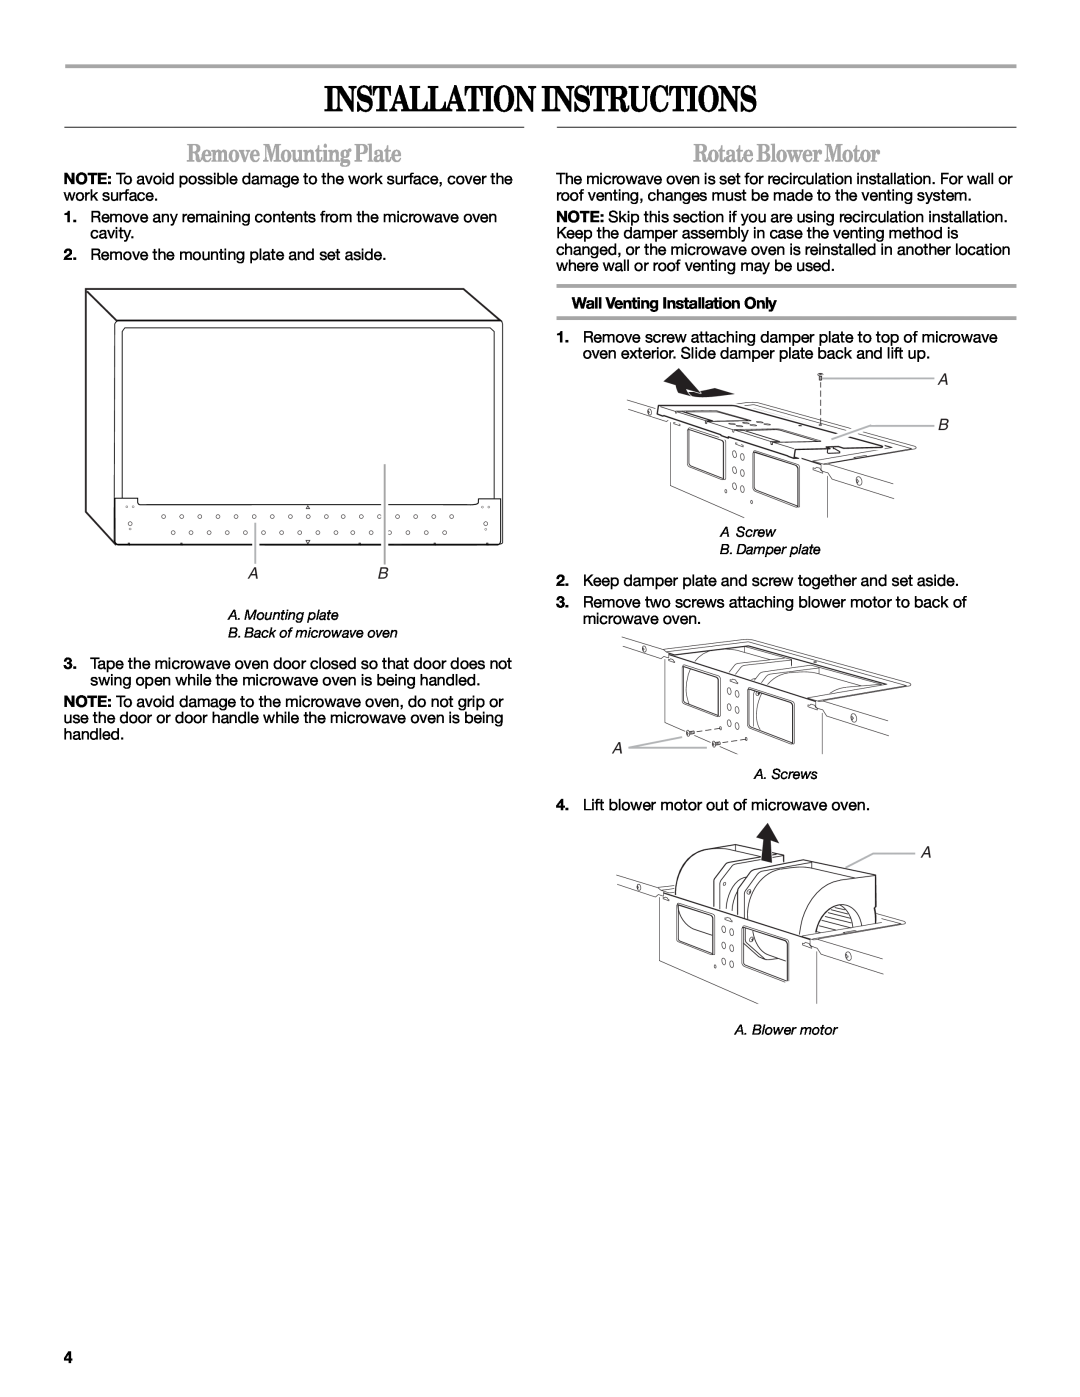 Whirlpool MH3184XPS5 Installation Instructions, RemoveMountingPlate, RotateBlowerMotor, Wall Venting Installation Only 